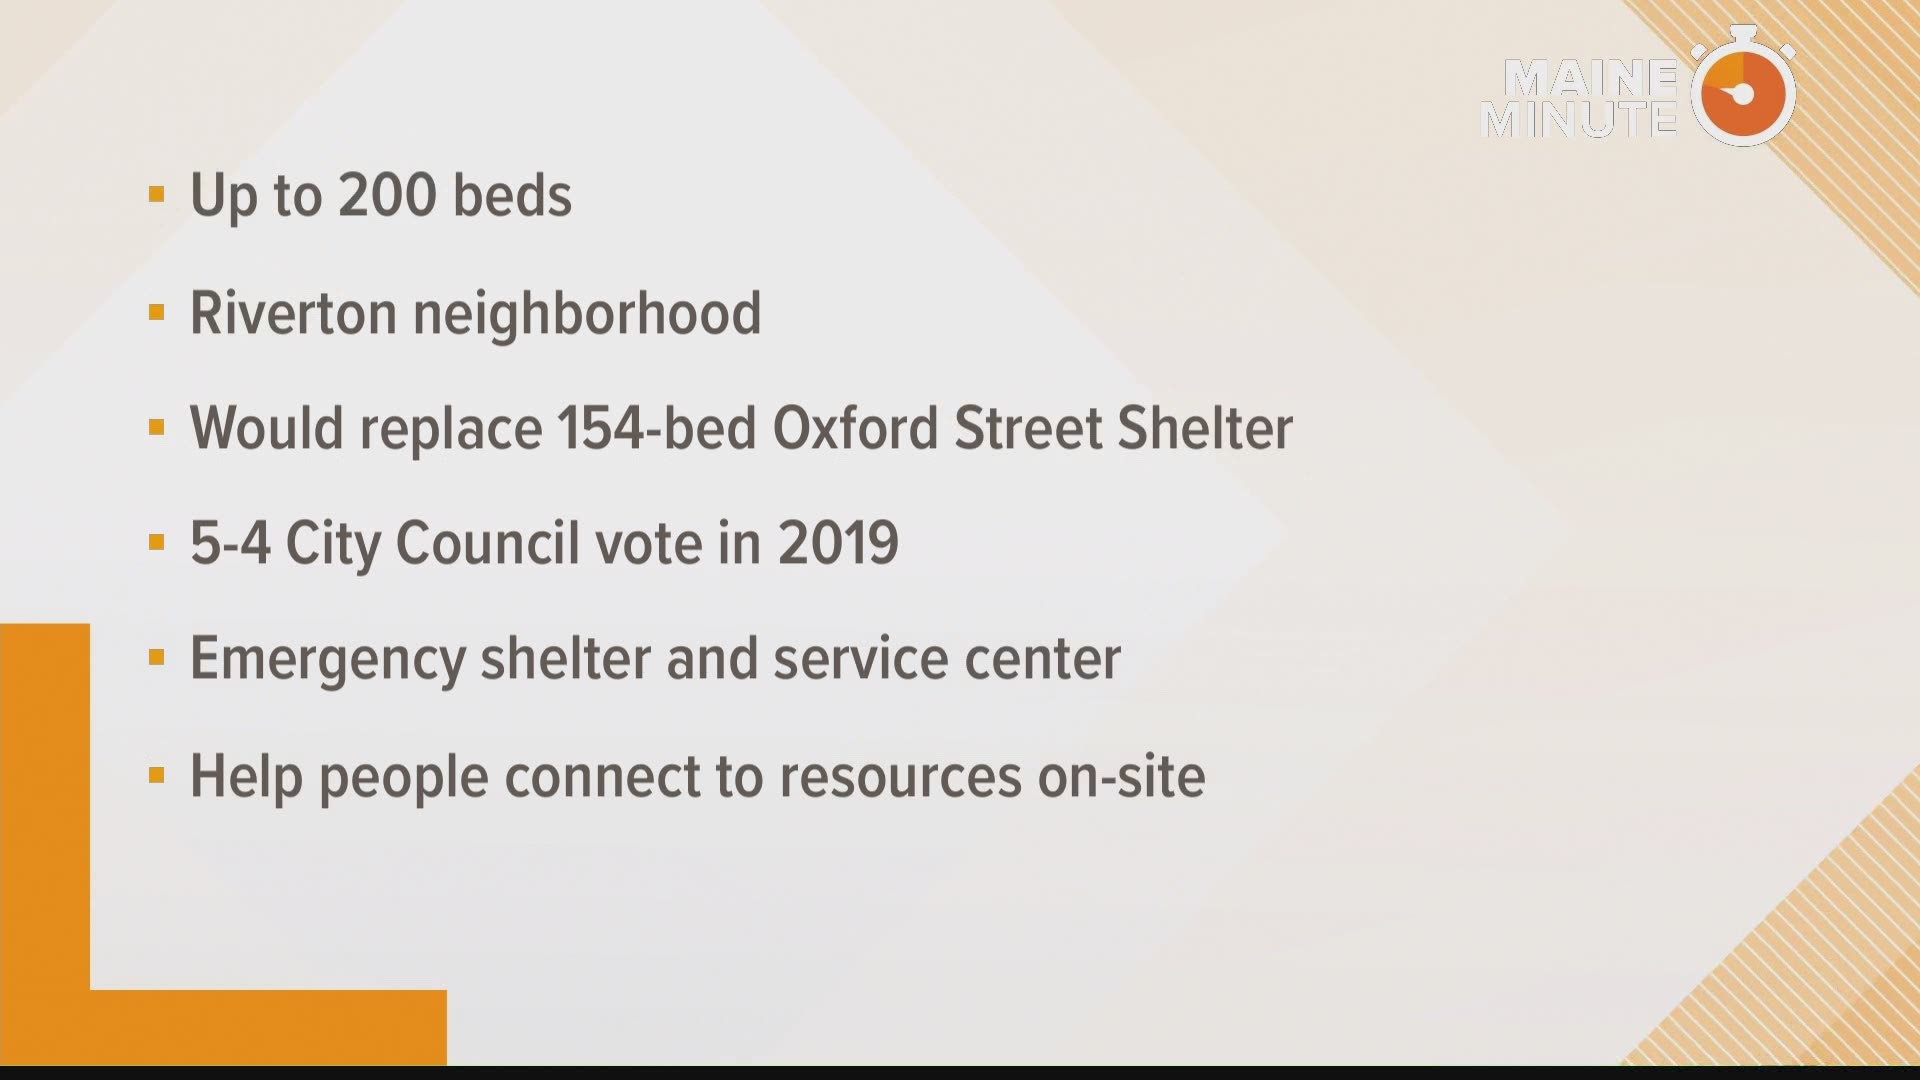 Portlanders for Safer Shelters opposes the city's plan to build an up to 200-bed homeless shelter on Riverside Street in the Riverton neighborhood.